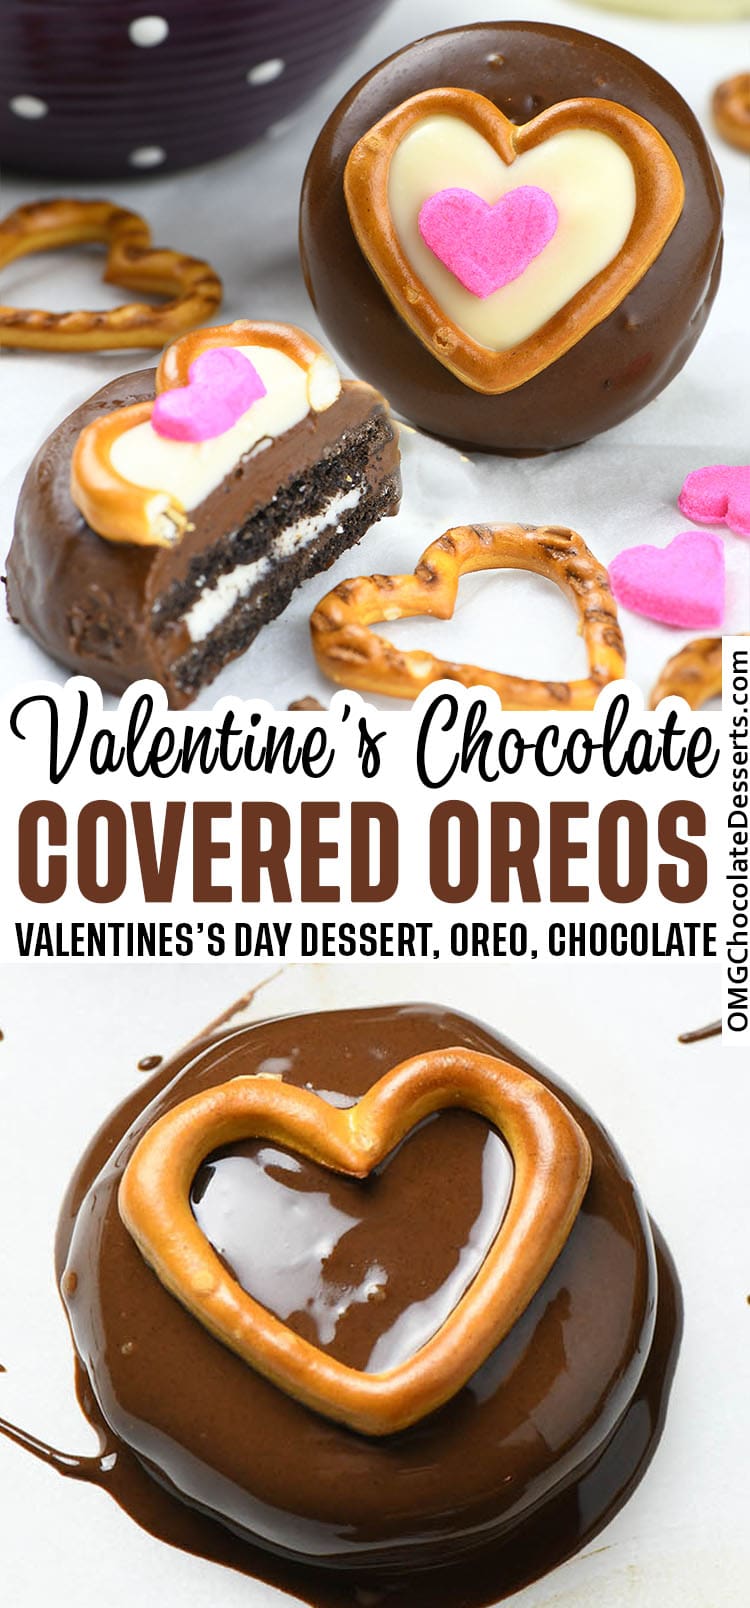 Oreo cookies dipped in white and dark chocolate, decorated with pretzel and candy hearts